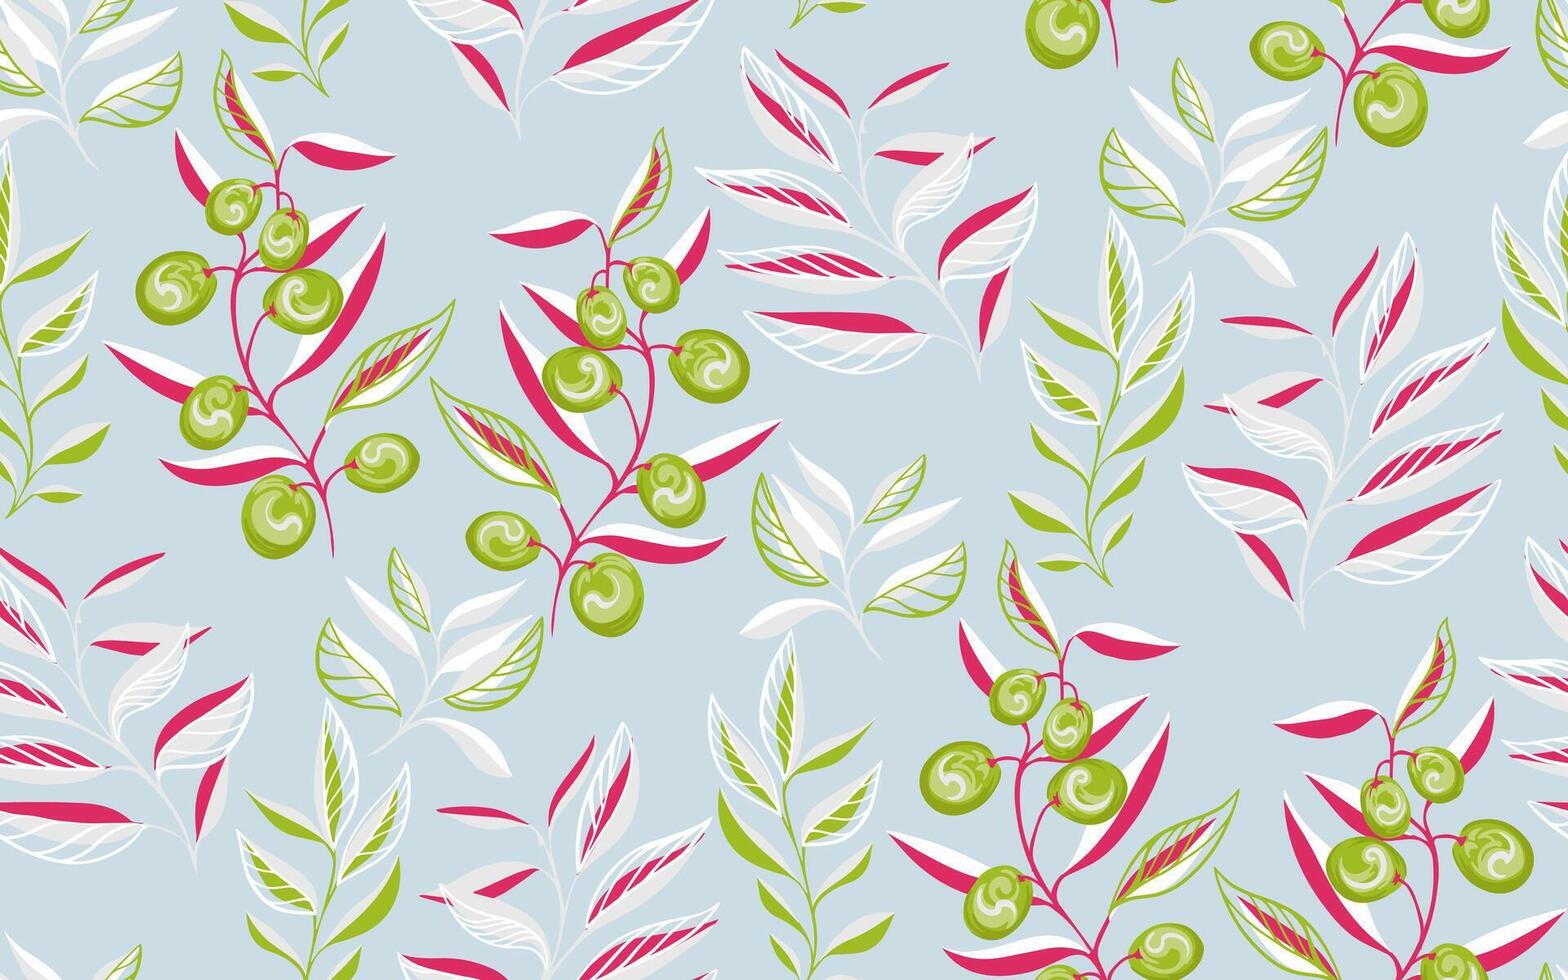 Creative stylized branches leaves abstract olives, seamless pattern. Vector hand drawn. Light pastel blue background with shapes leaf stems shapes drops, berries printing. Template for design, textile